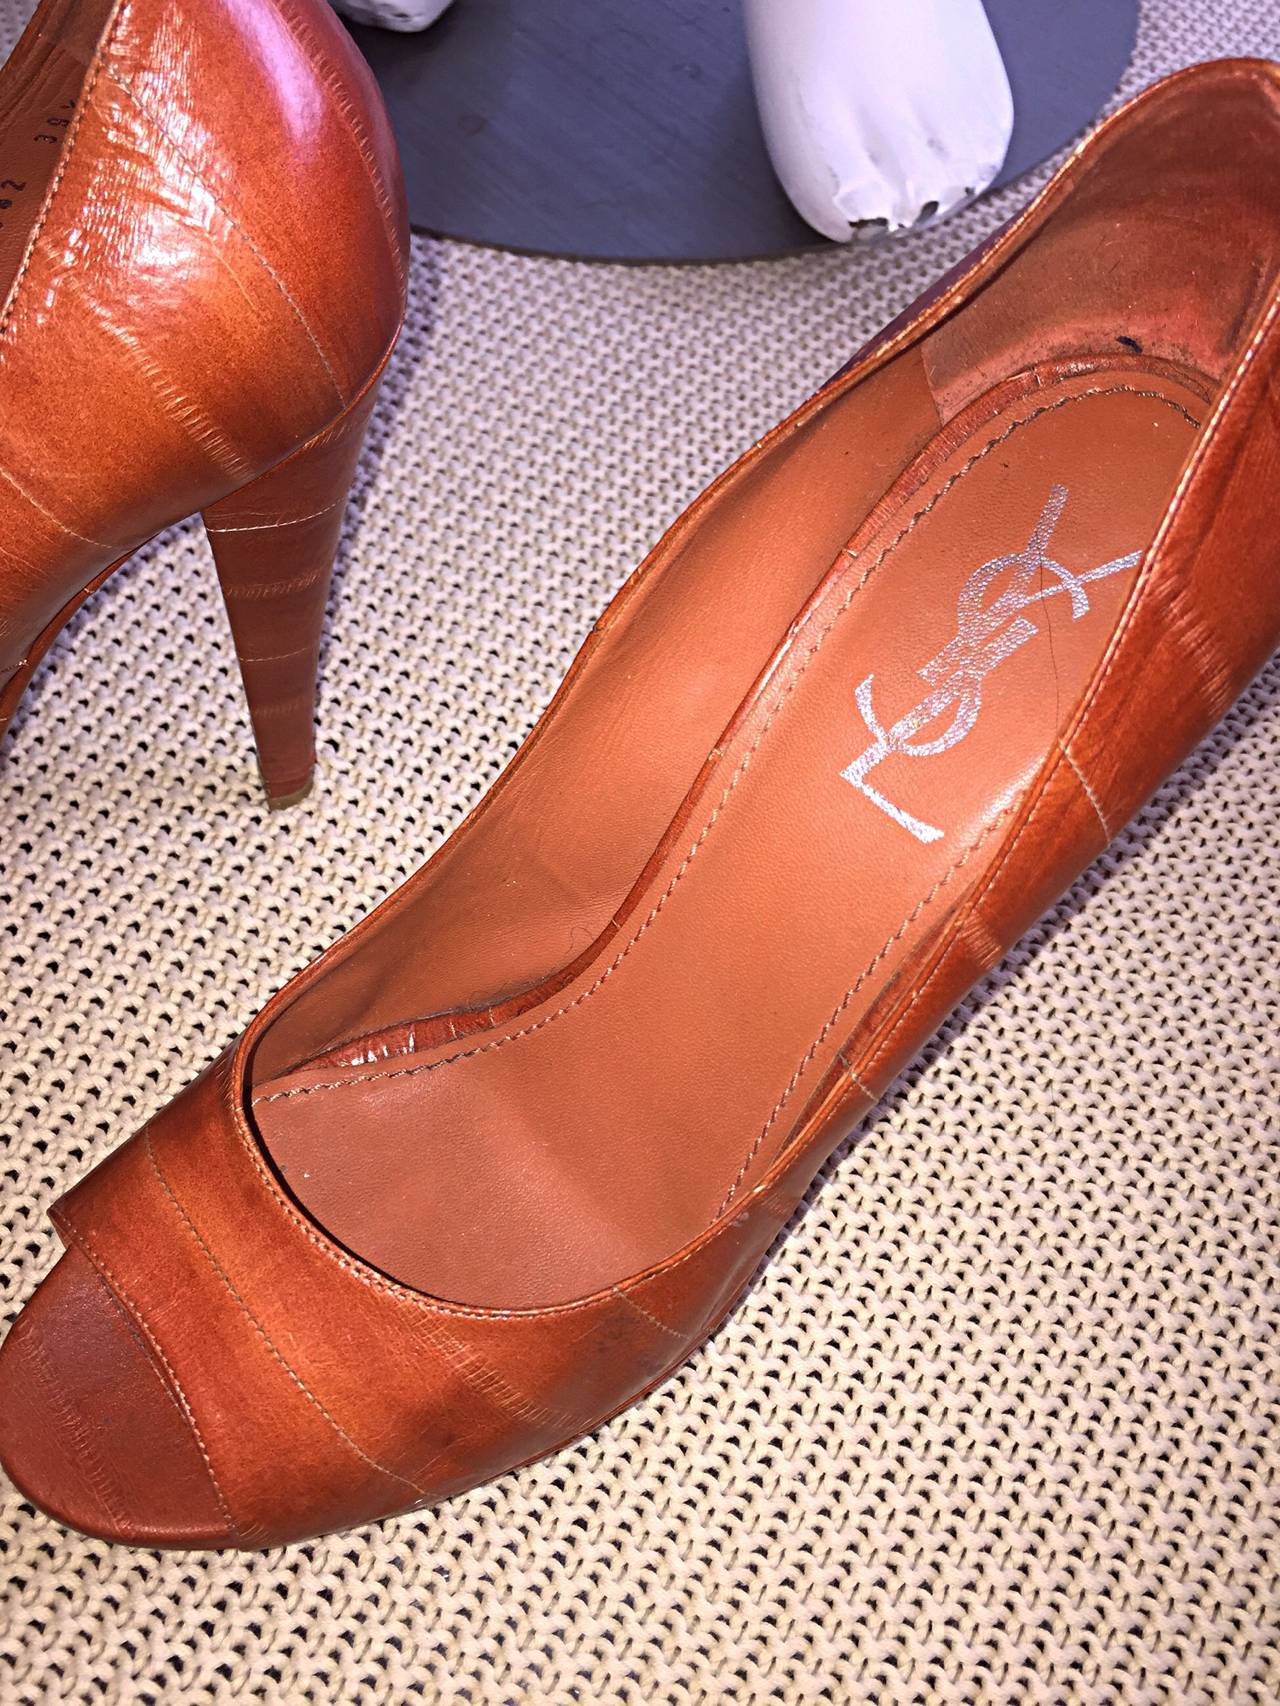 Incredible YSL, by Tom Ford eel skin platform heels! Neutral cognac color goes with everything! In great condition, with minor knick on bottom heel (not noticeable). Made in Italy. Marked Size 39.5... Runs true to size.